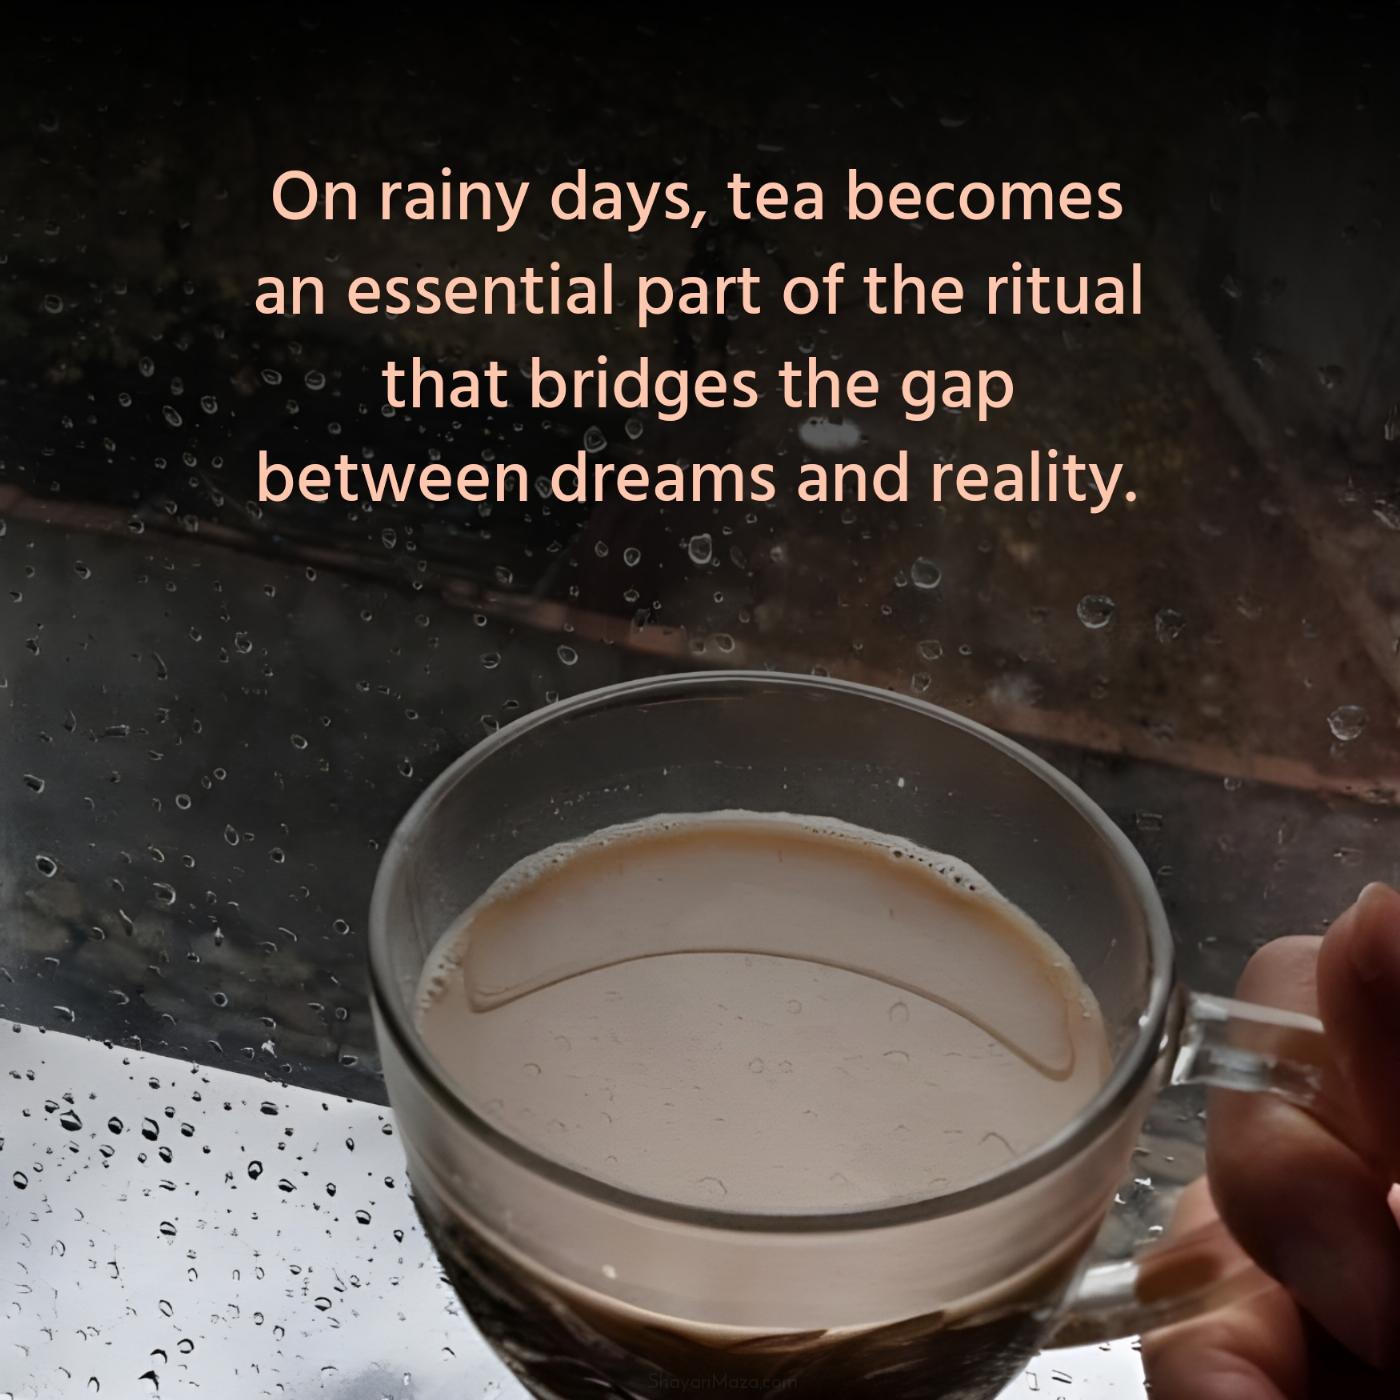 On rainy days tea becomes an essential part of the ritual